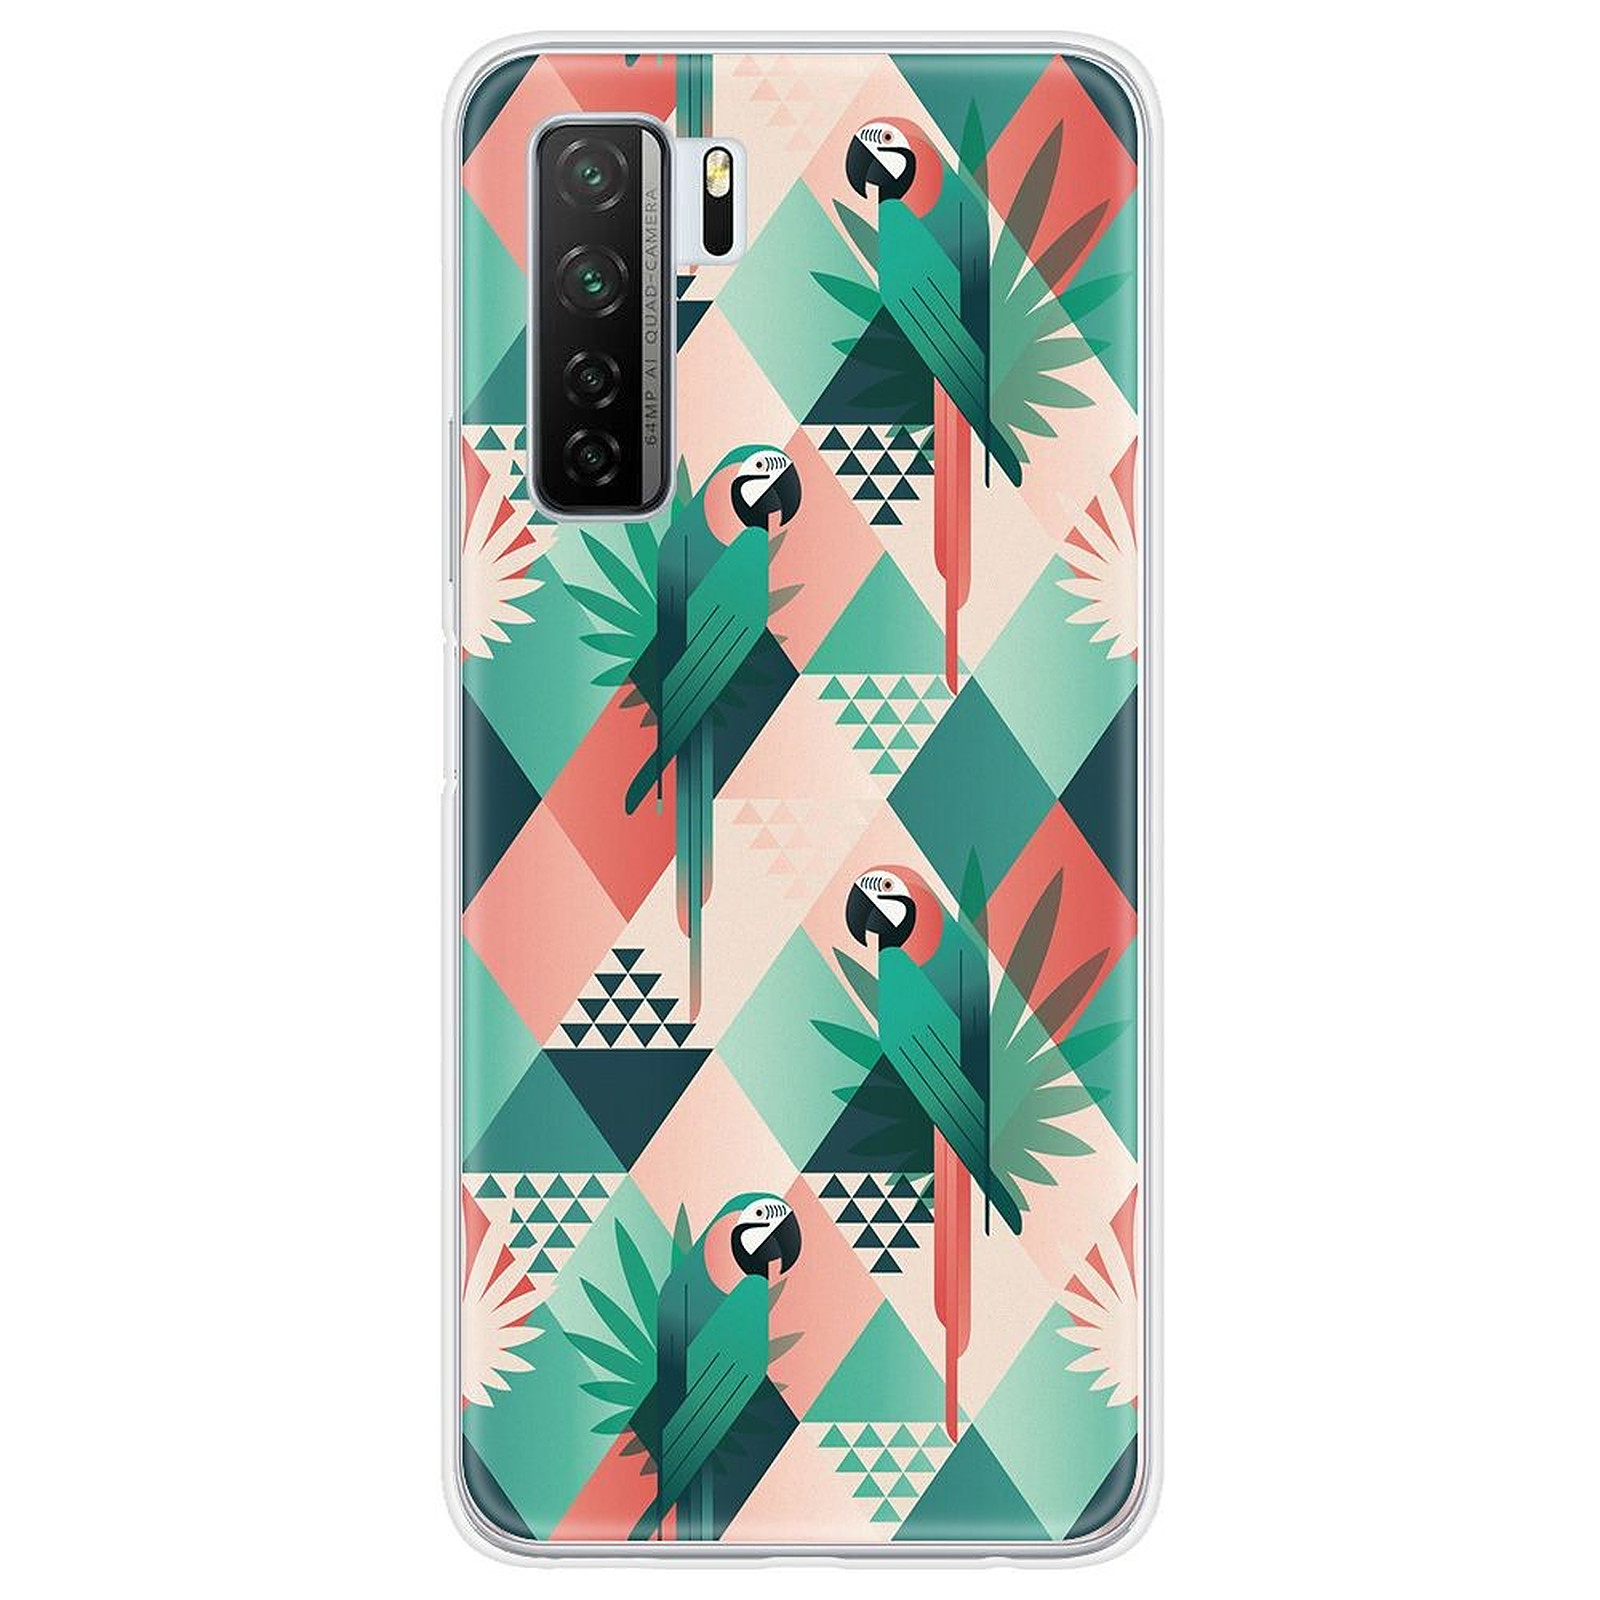 1001 Coques Coque silicone gel Huawei P40 Lite 5G motif Perroquet ge´ome´trique - Coque telephone 1001Coques